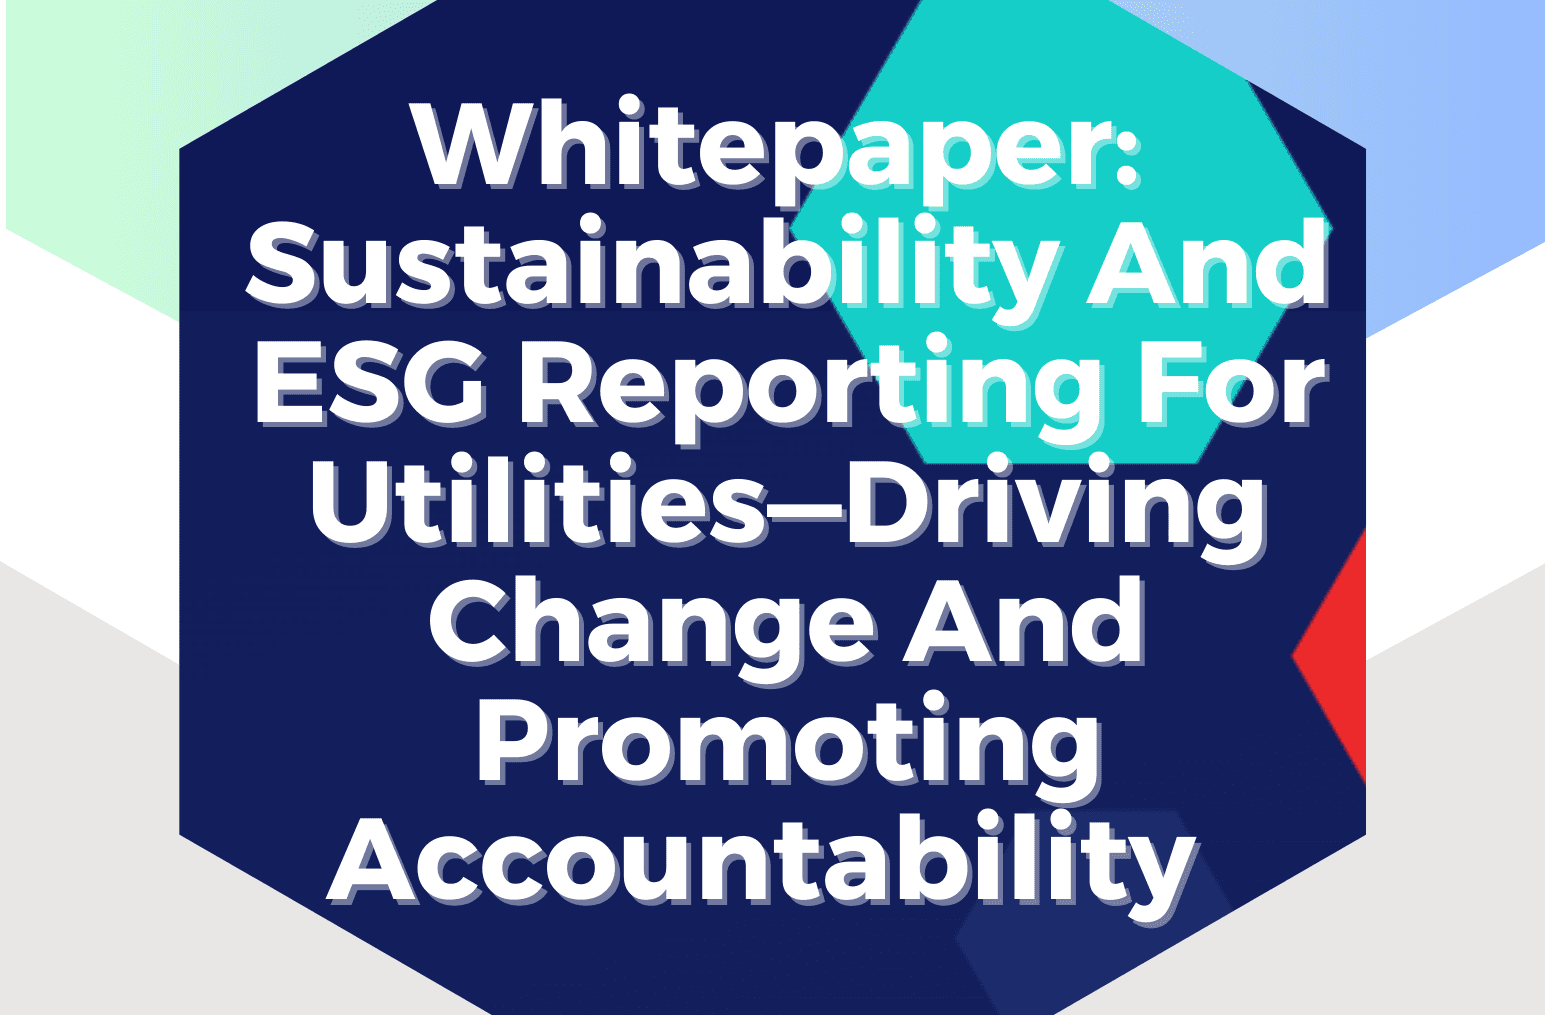 Sustainability And ESG Reporting For Utilities: Driving Change And Promoting Accountability